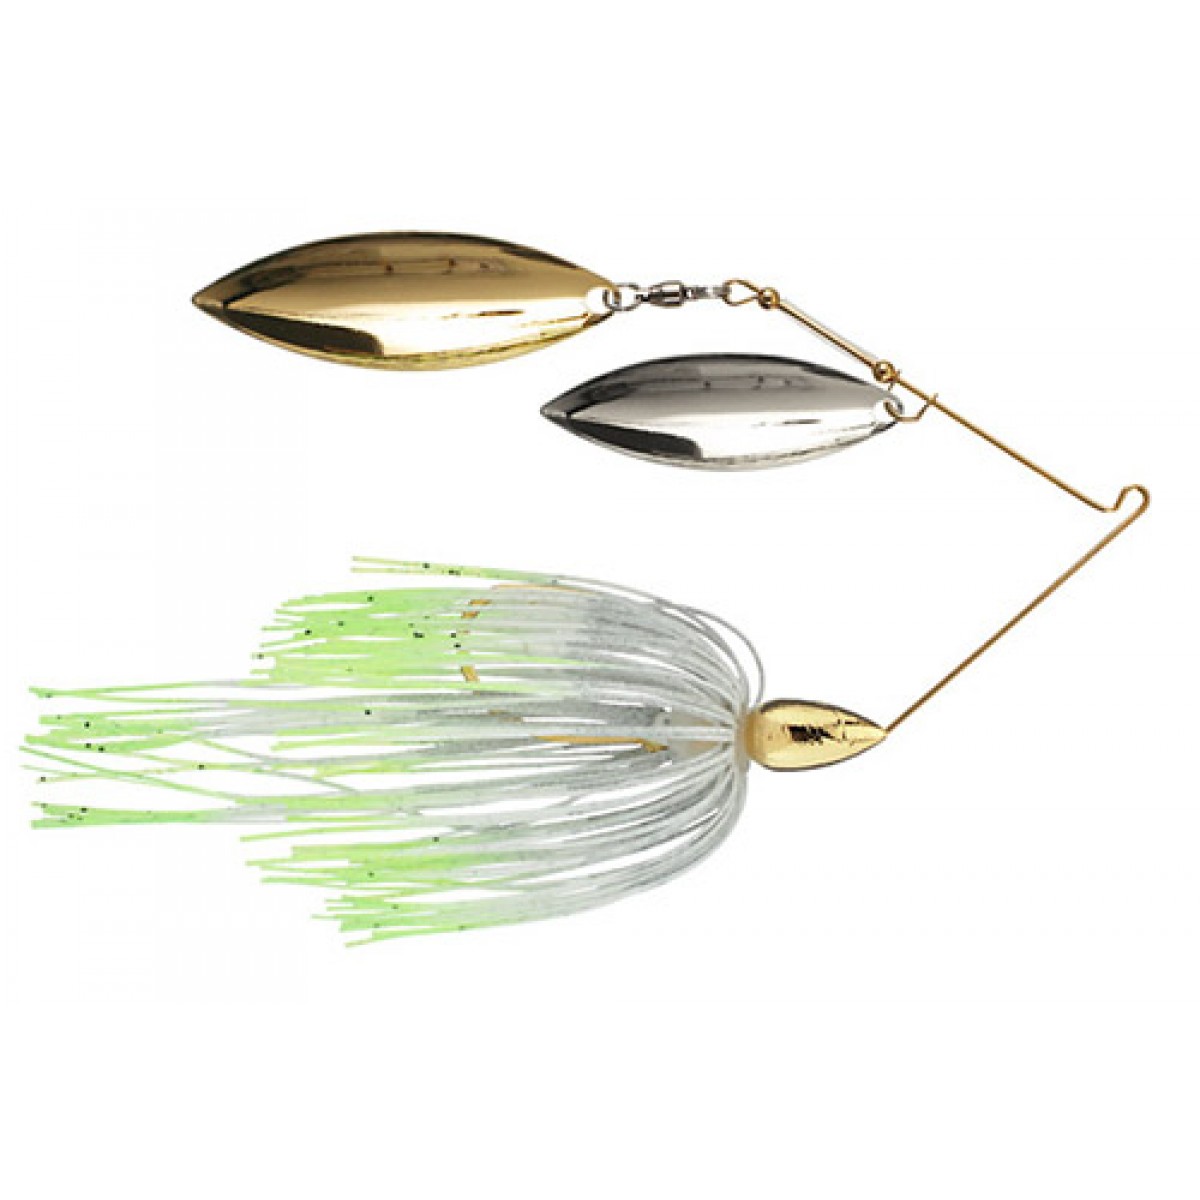 Details about / War Eagle Custom Lures Spinnerbait Mustad Hook White Gold 3...